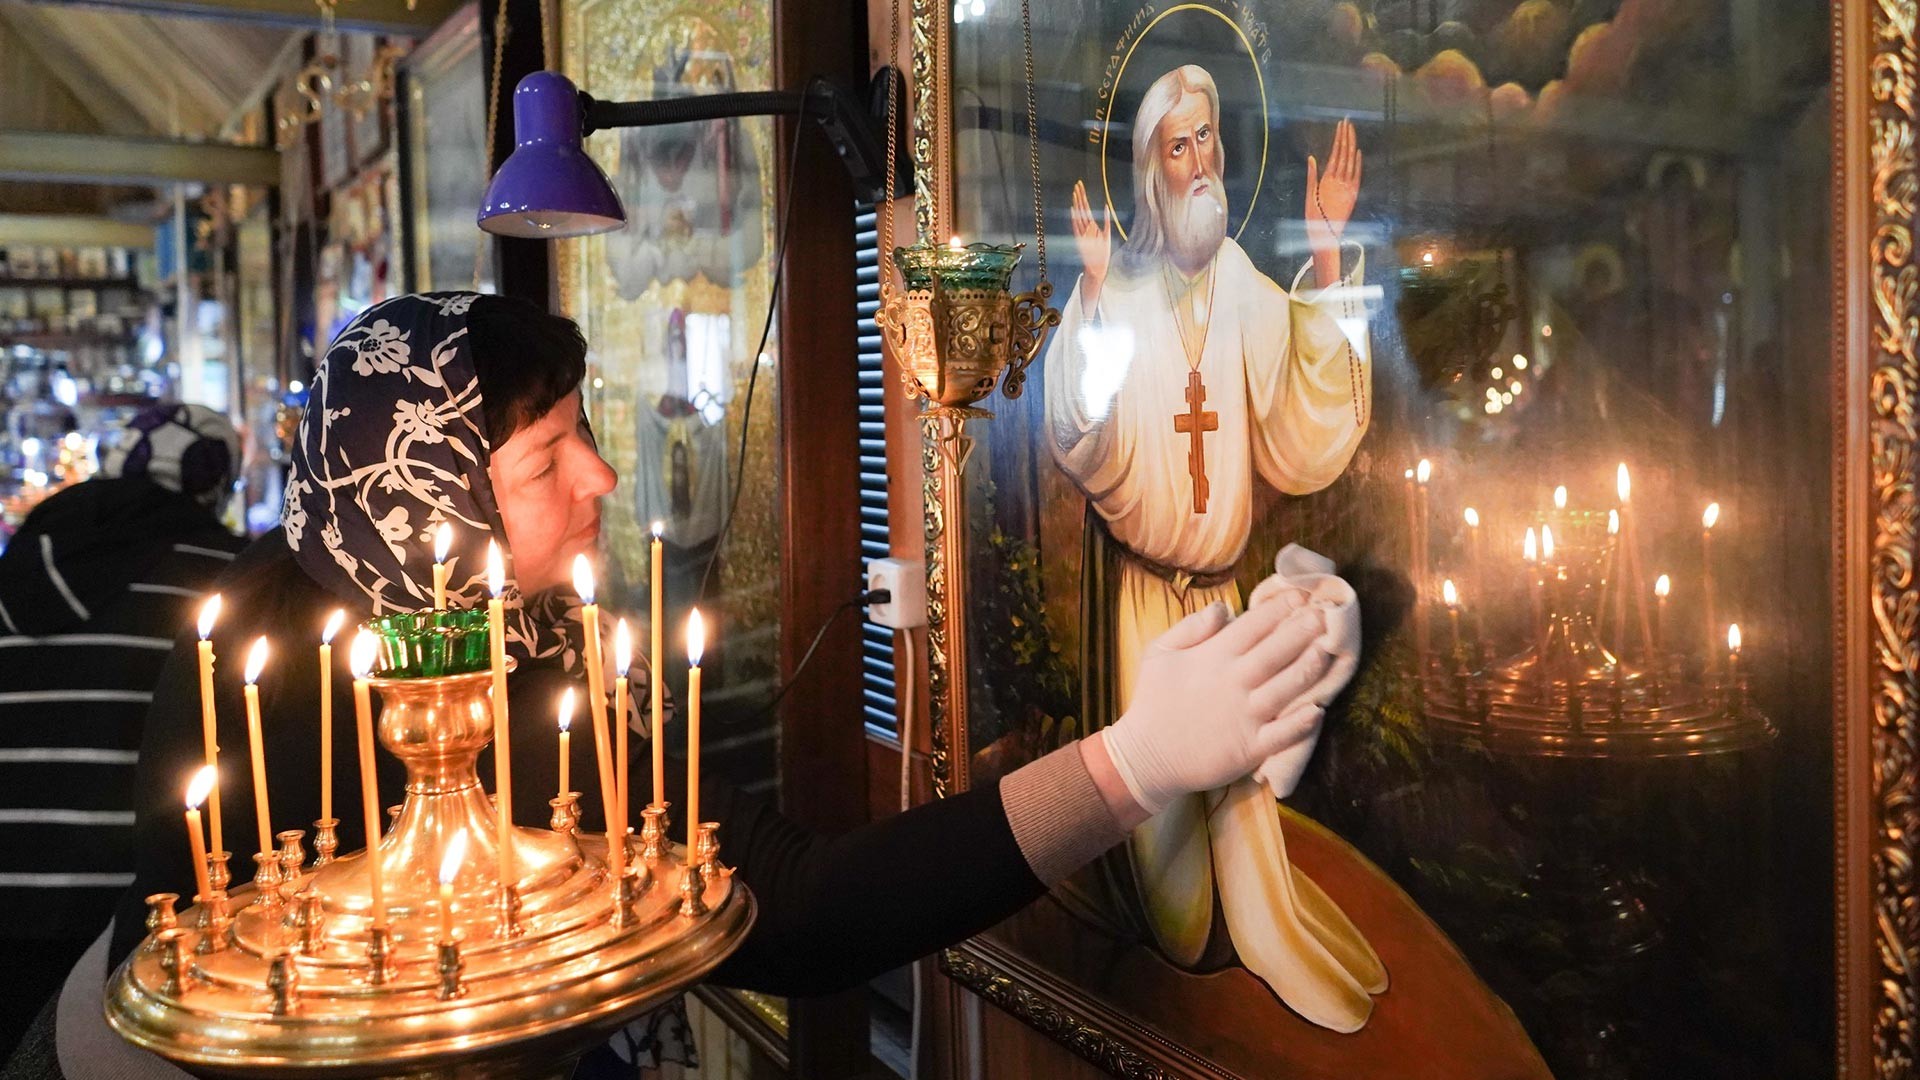 Preventive measures in the Church of the Holy Martyr Hermogenes in Golyanovo in connection with the situation with the coronavirus